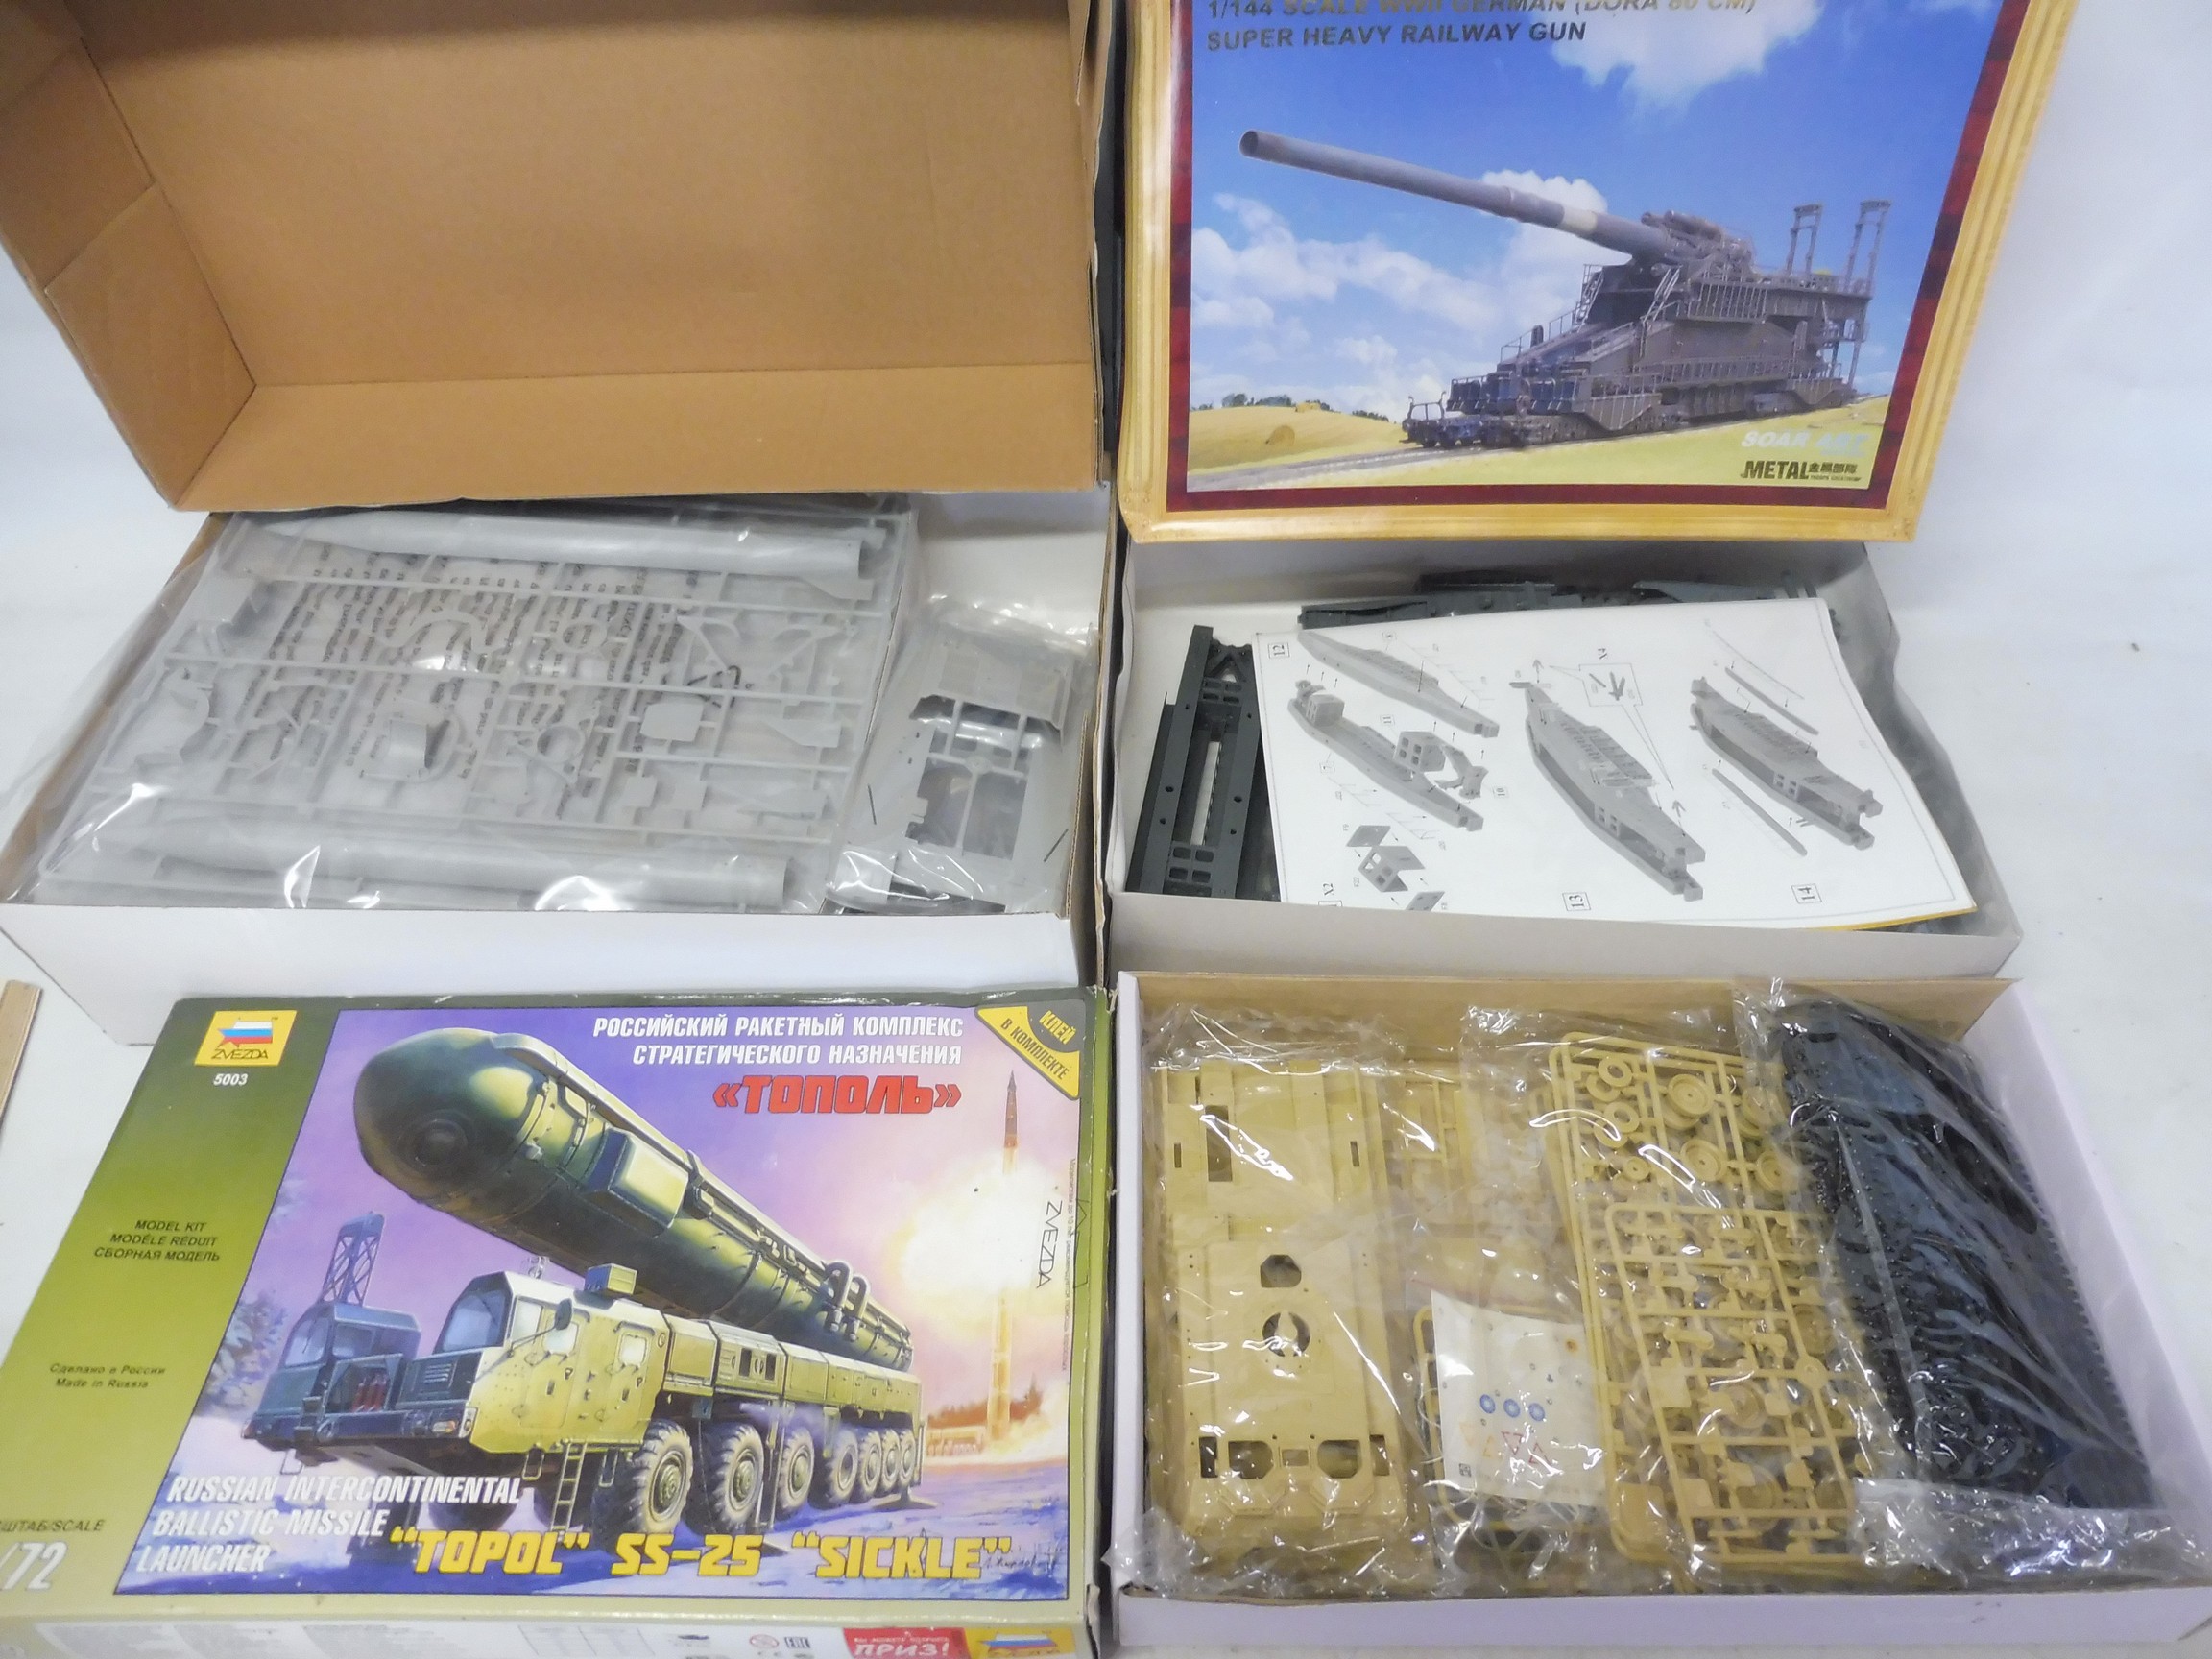 Four boxed kits, Russian missile launcher, railway gun etc. various scales, unmade. - Image 2 of 2